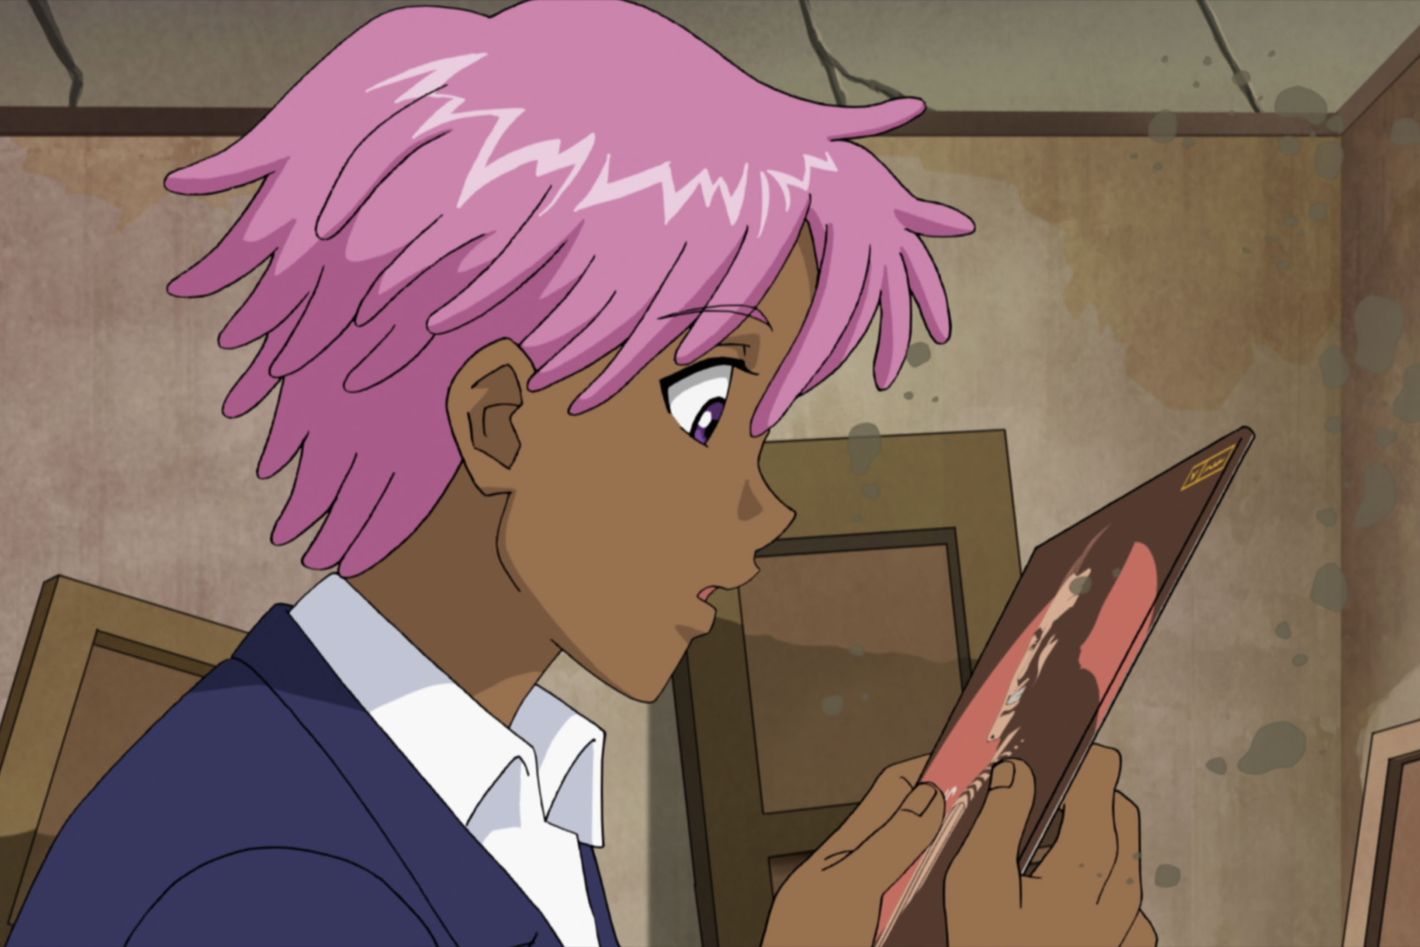 Anime Miley Cyrus Porn - Shouldn't There Be More Music in Neo Yokio?